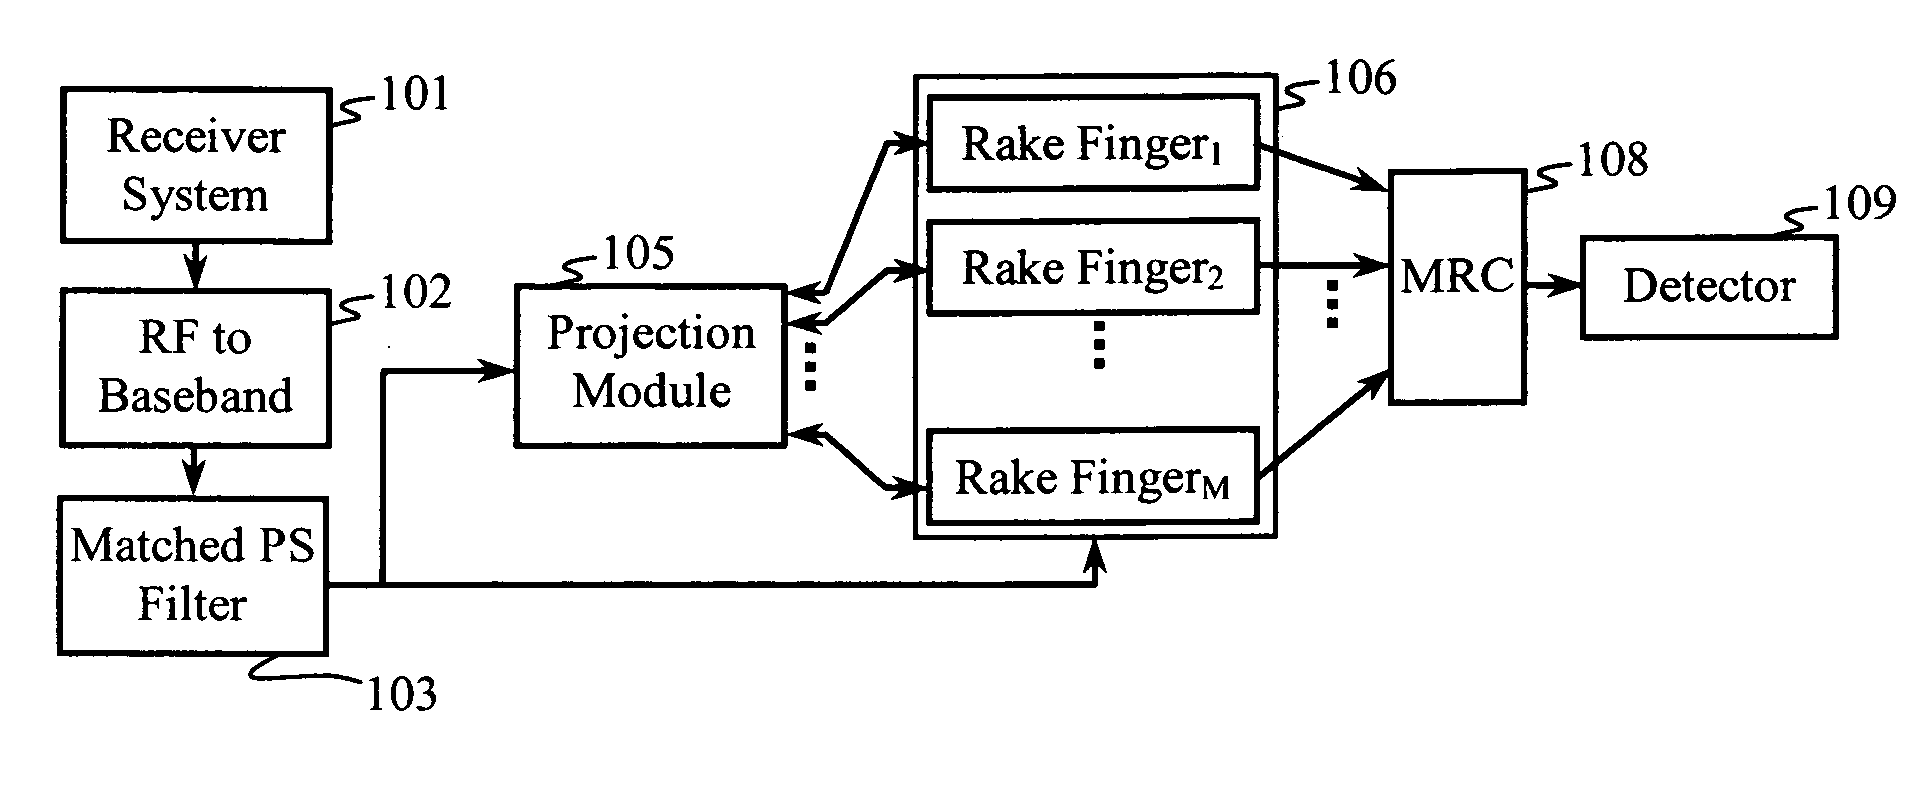 Construction of projection operators for interference cancellation